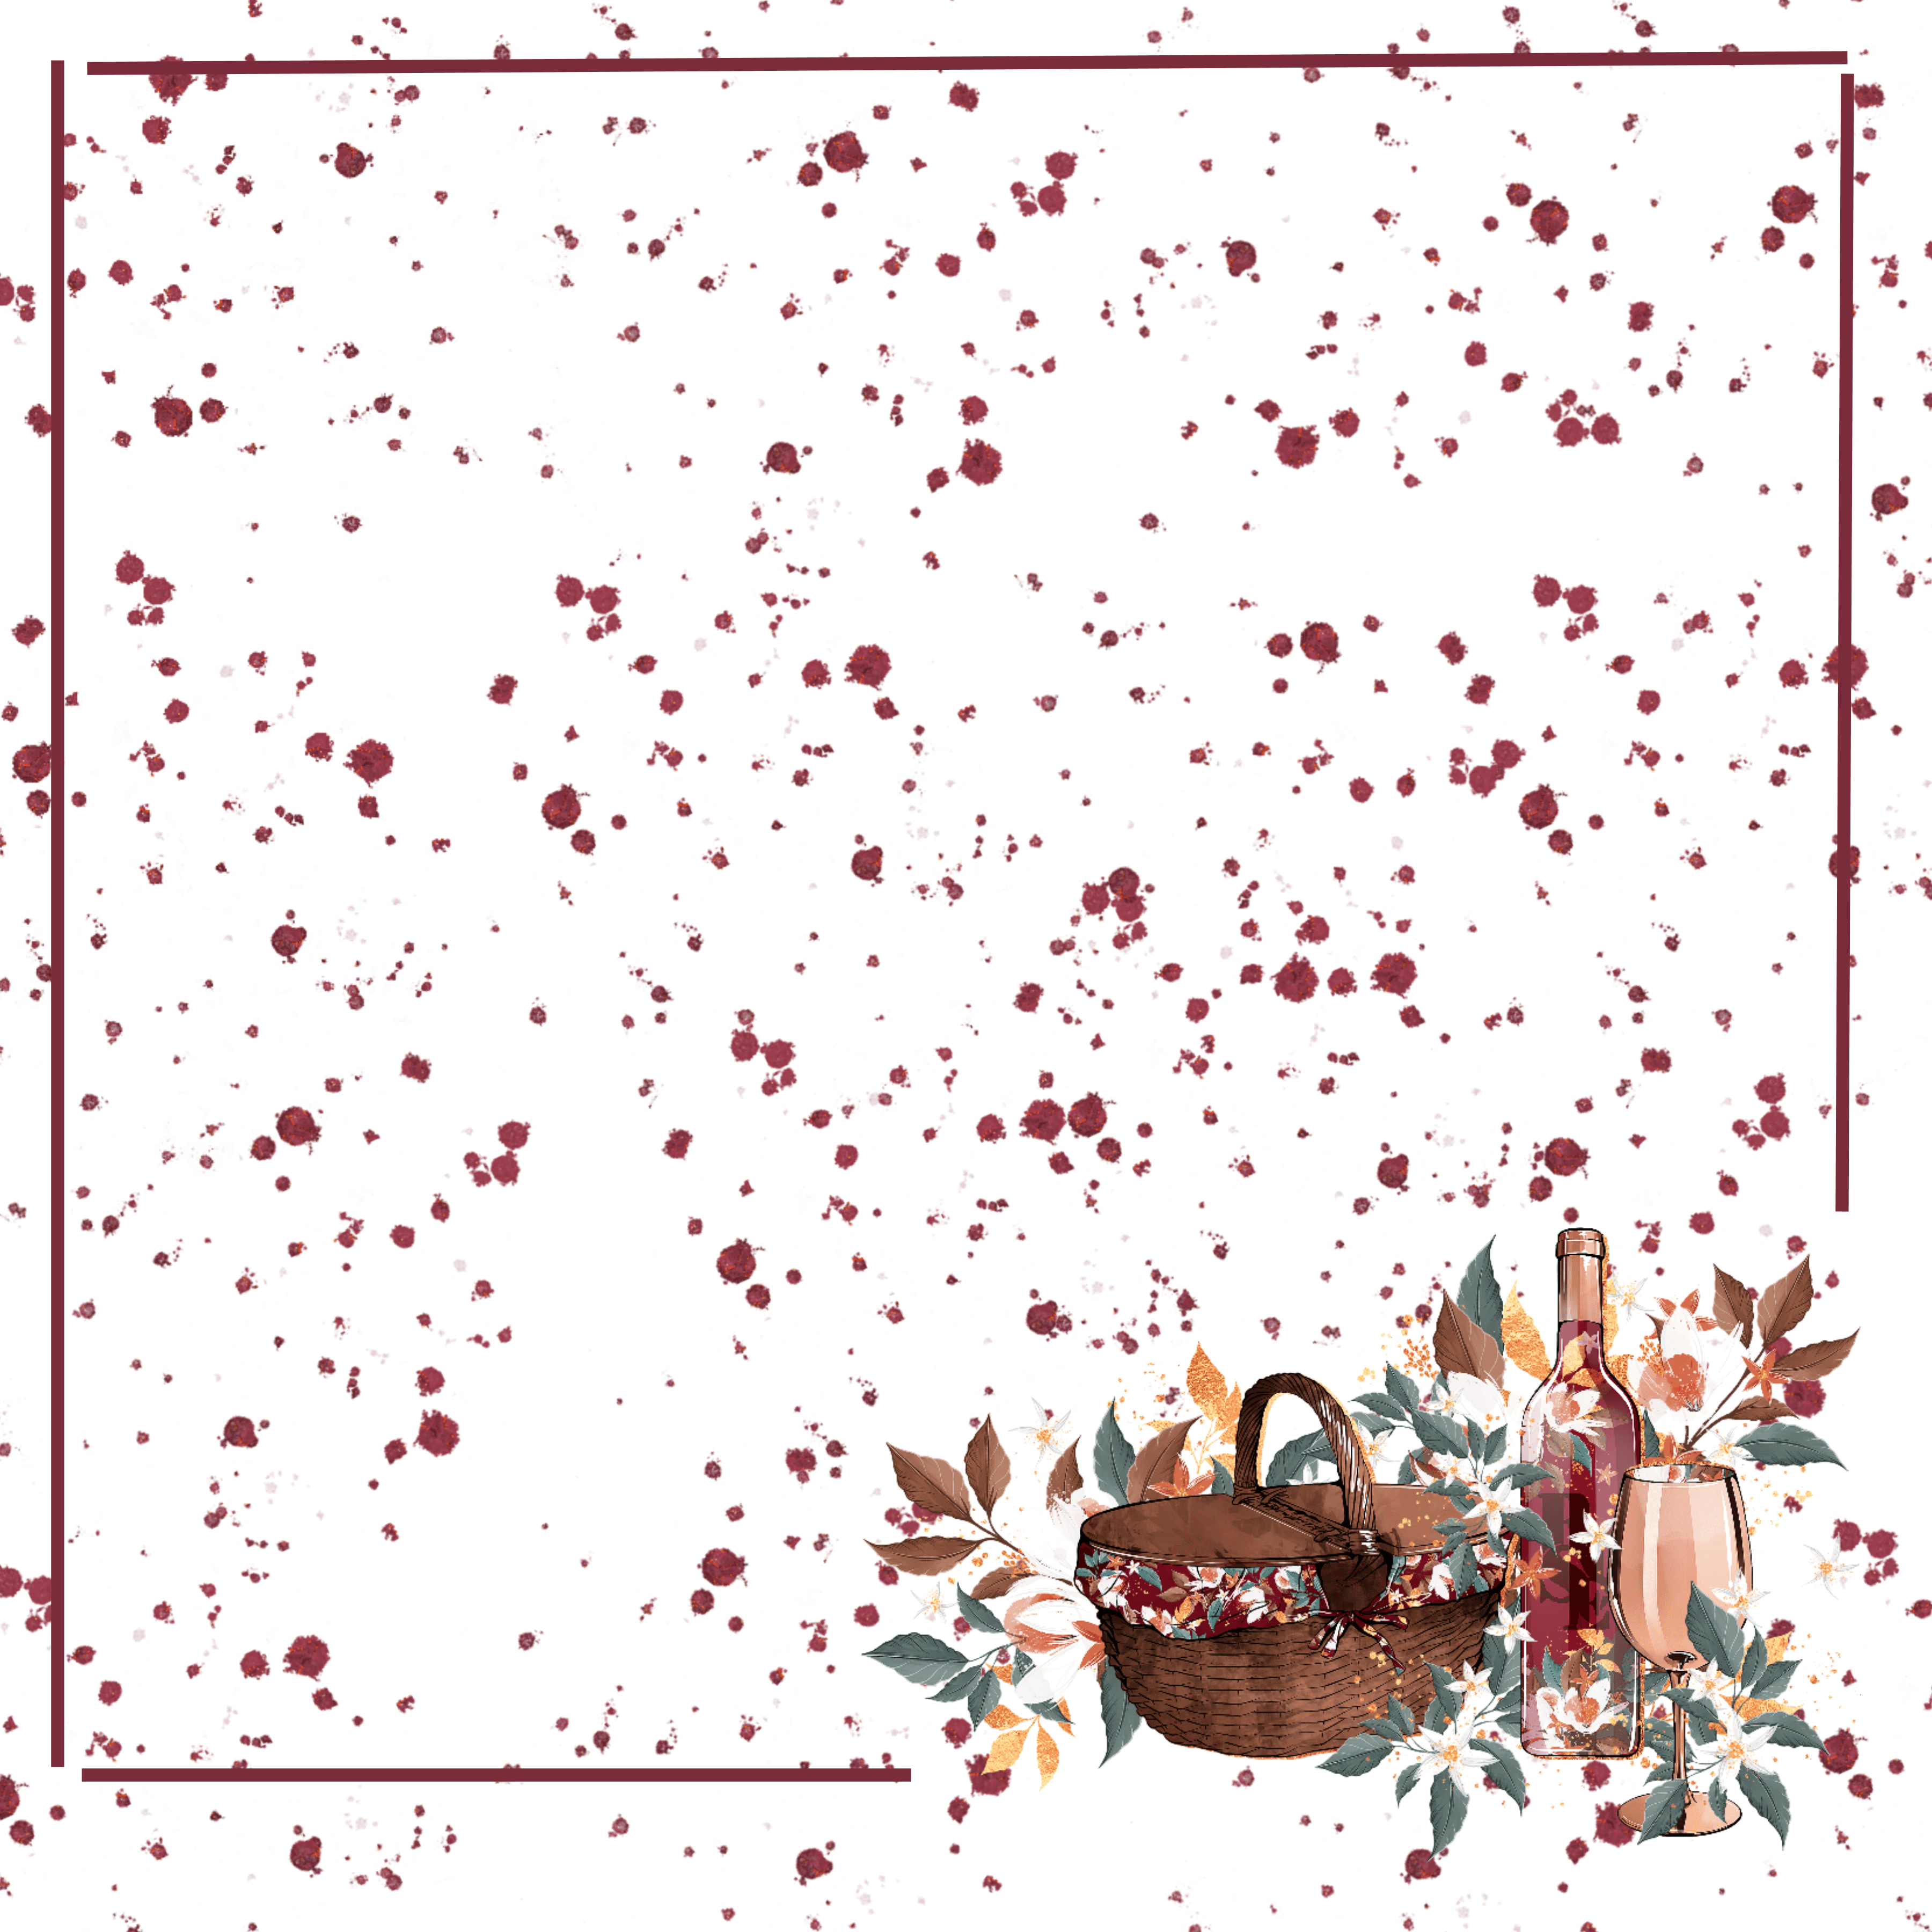 Frou Frou's It's A Rose Day Collection Perfect Picnic 12 x 12 Double-Sided Scrapbook Paper by SSC Designs - Scrapbook Supply Companies